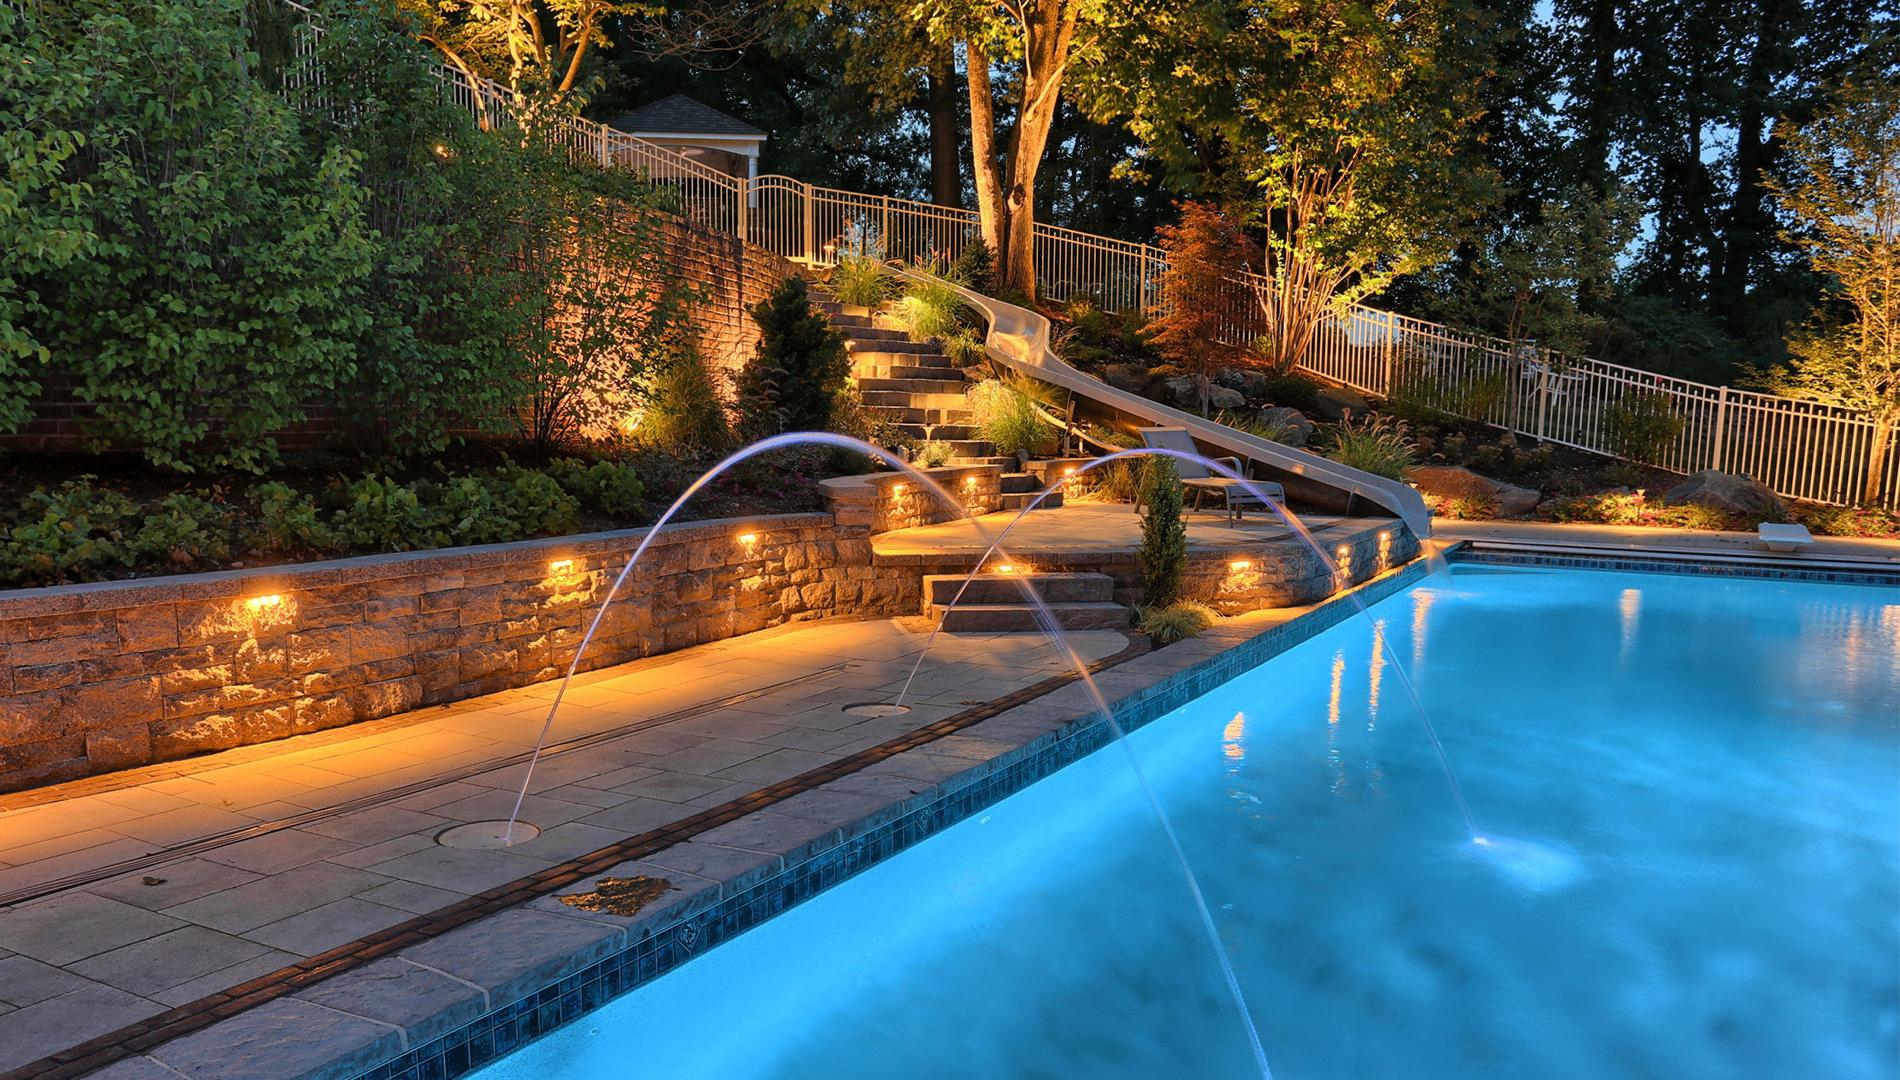 Harrisburg PA landscaping and poolscape design